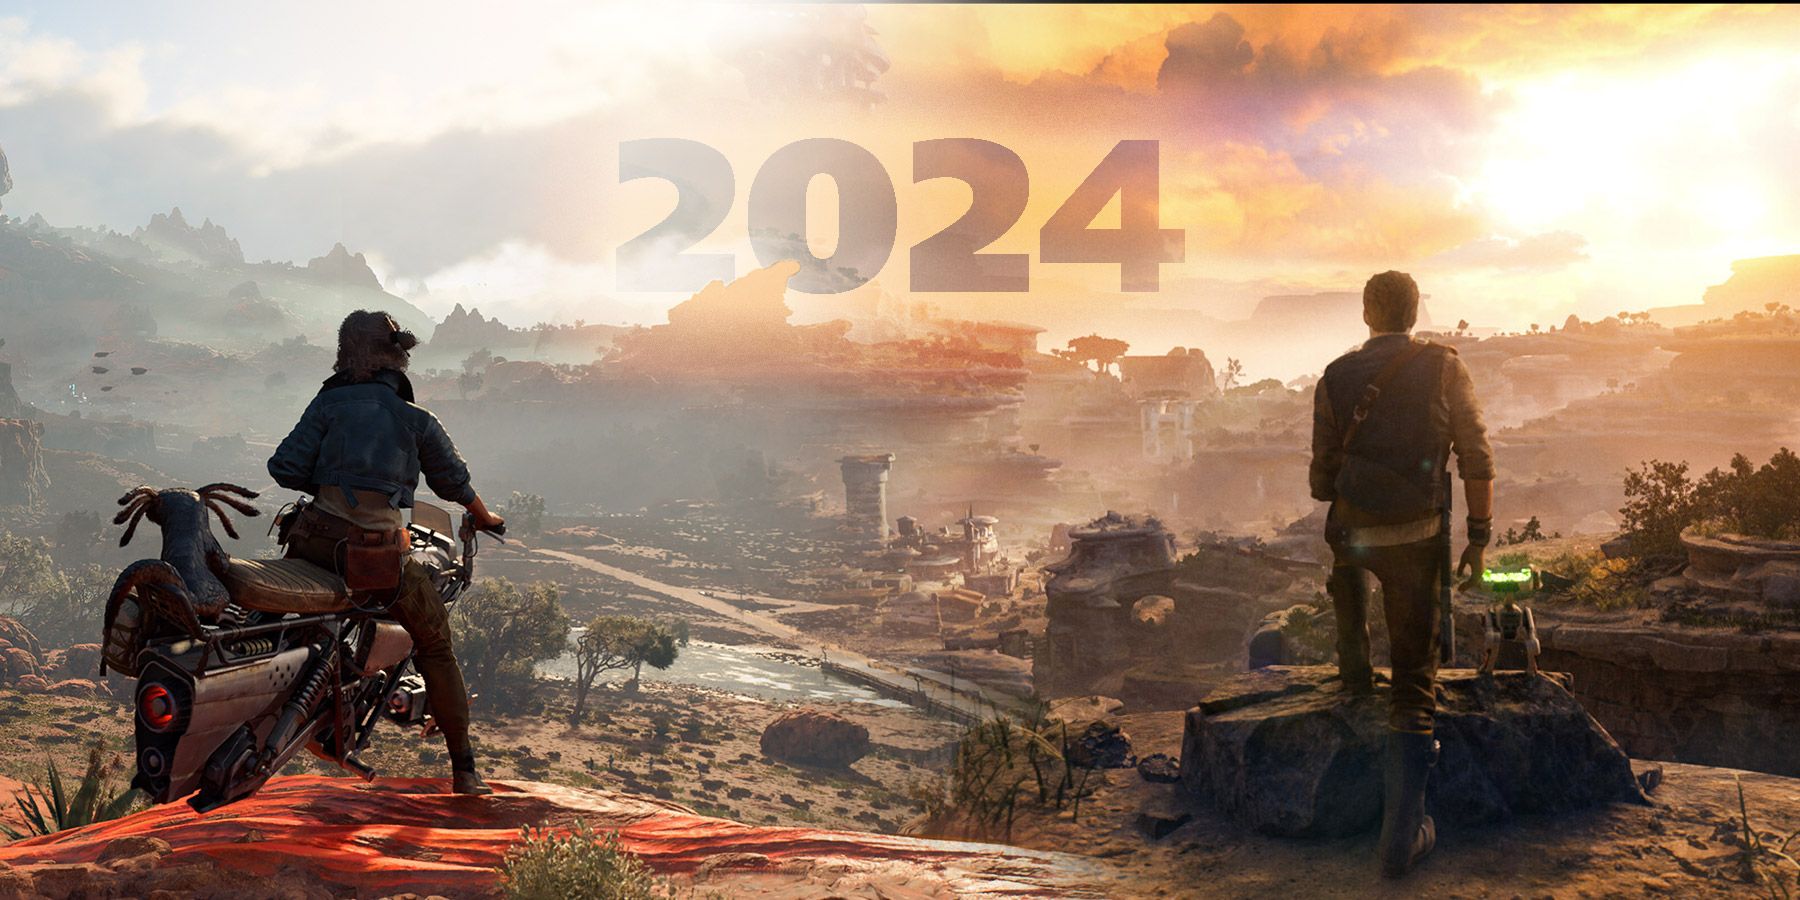 What to Expect From Star Wars Games in 2024